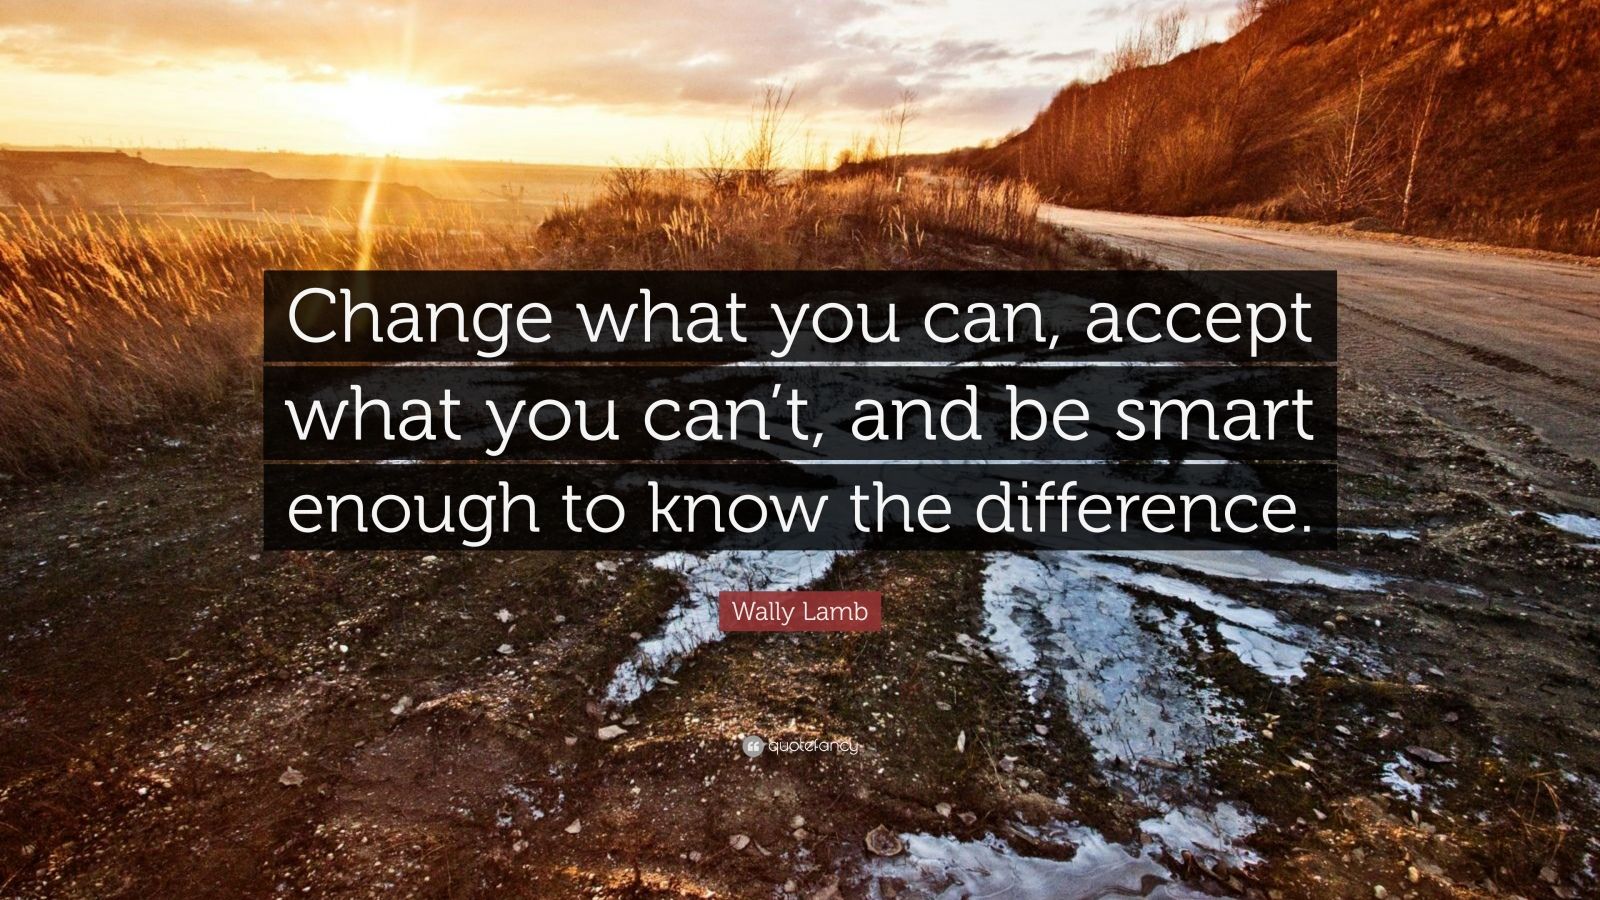 Wally Lamb Quote: “Change what you can, accept what you can’t, and be ...